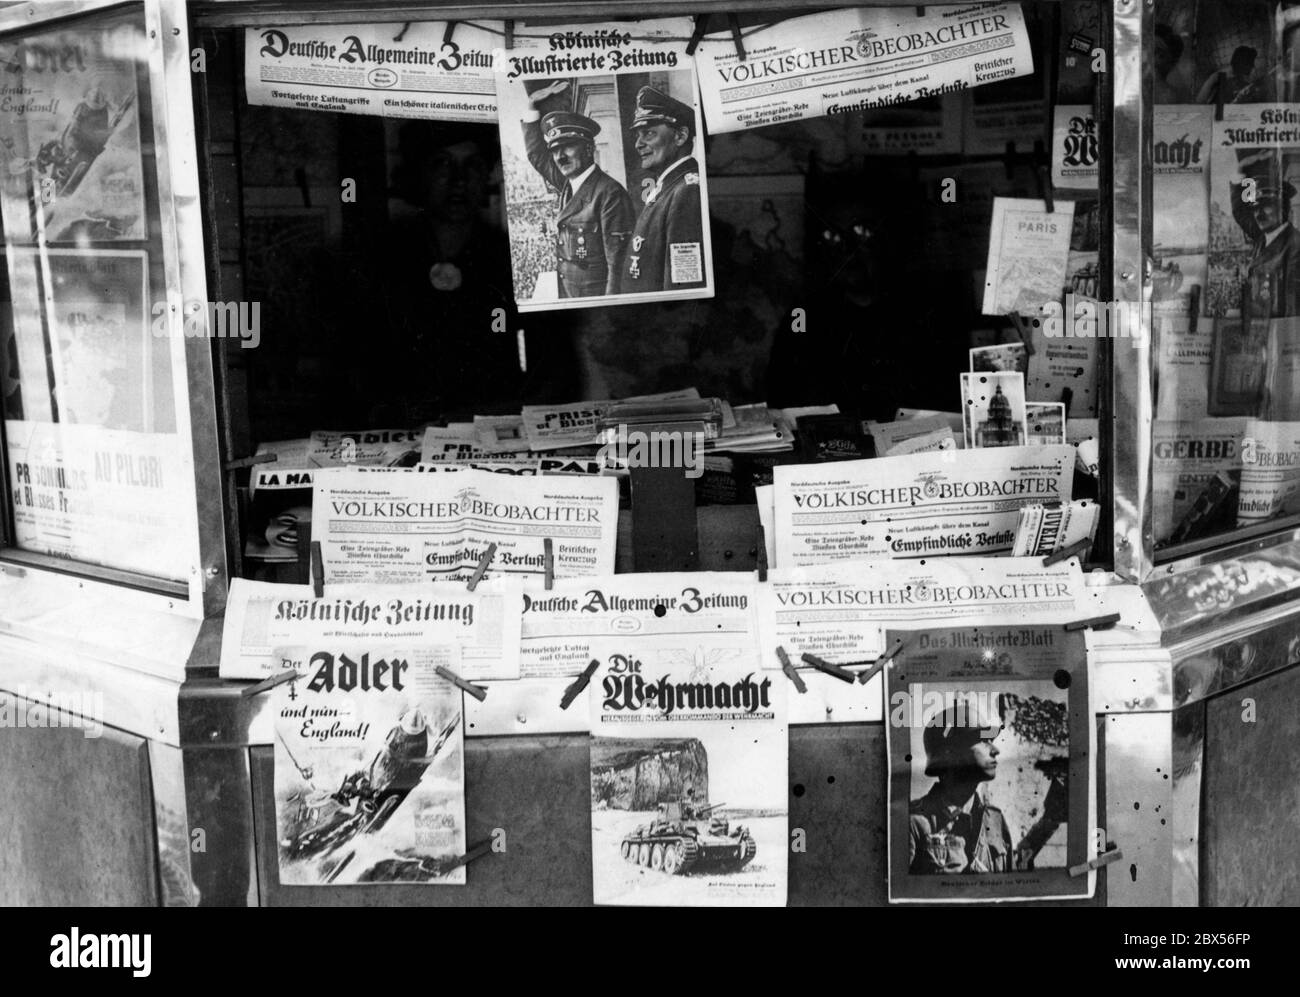 Four weeks after the German invasion of Paris, the newsstands are full of German newspapers and magazines, here on the Boulevard des Italiens, near the opera. Among the newspapers are the Deutsche Allgemeine Zeitung, the Koelnische Illustrierte Zeitung ( title picture with Adolf Hitler and Hermann Goering), Voelkischer Beobachter, Koelnische Zeitung, Deutsche Allgemeine Zeitung, Der Adler ('and now - England'), Die Wehrmacht (ed. by the High Command of the Wehrmacht, title picture: a tank) as well as Das Illustrierte Blatt (title picture: a soldier). Stock Photo